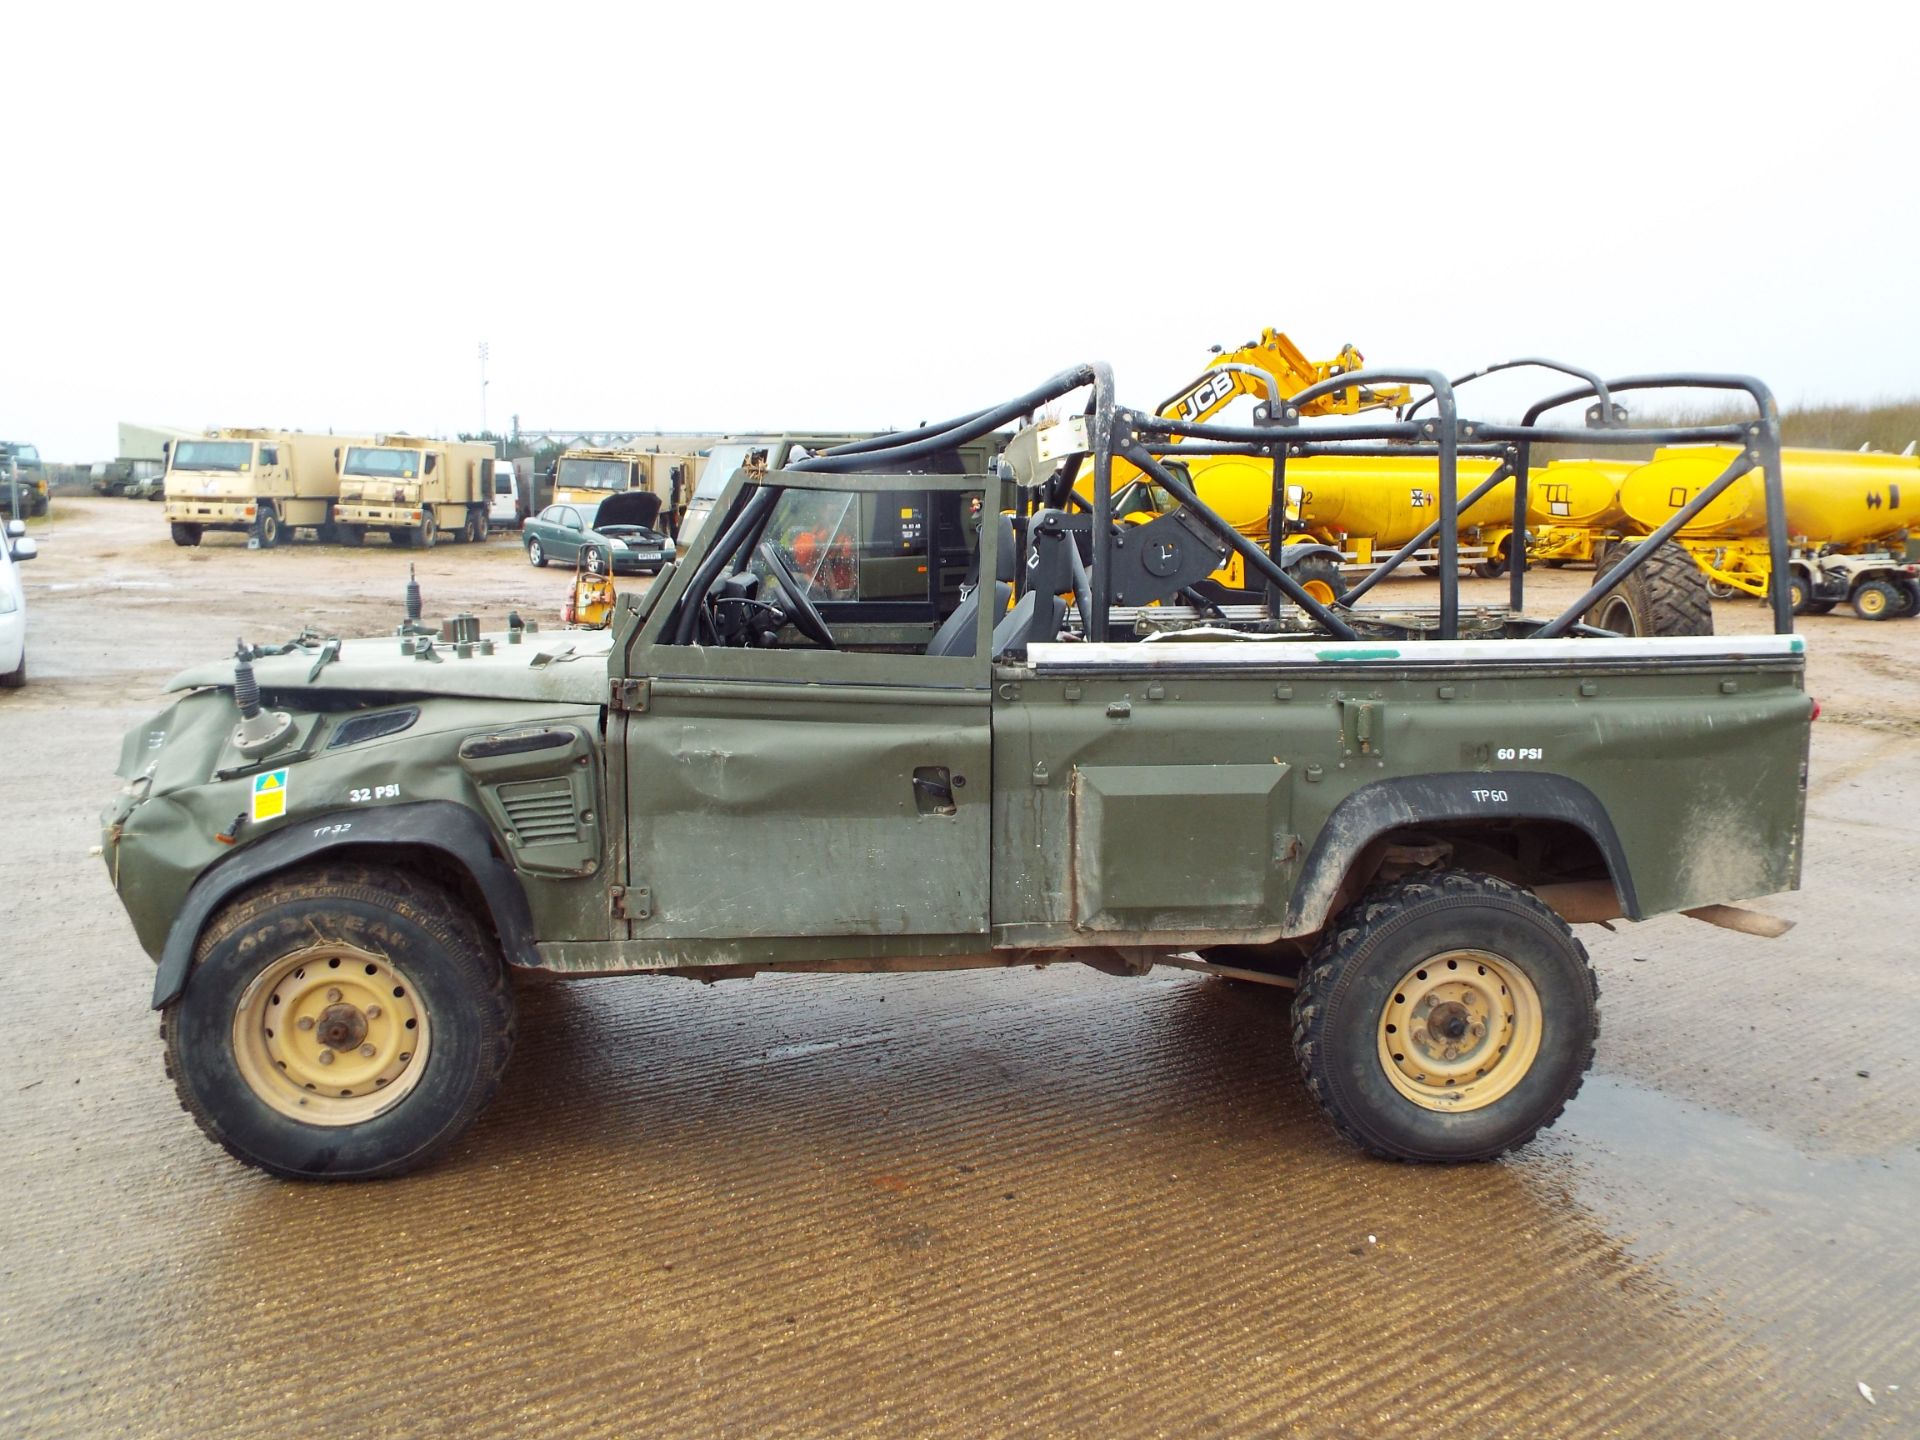 Military Specification Land Rover Wolf 110 Hard Top - Image 4 of 27